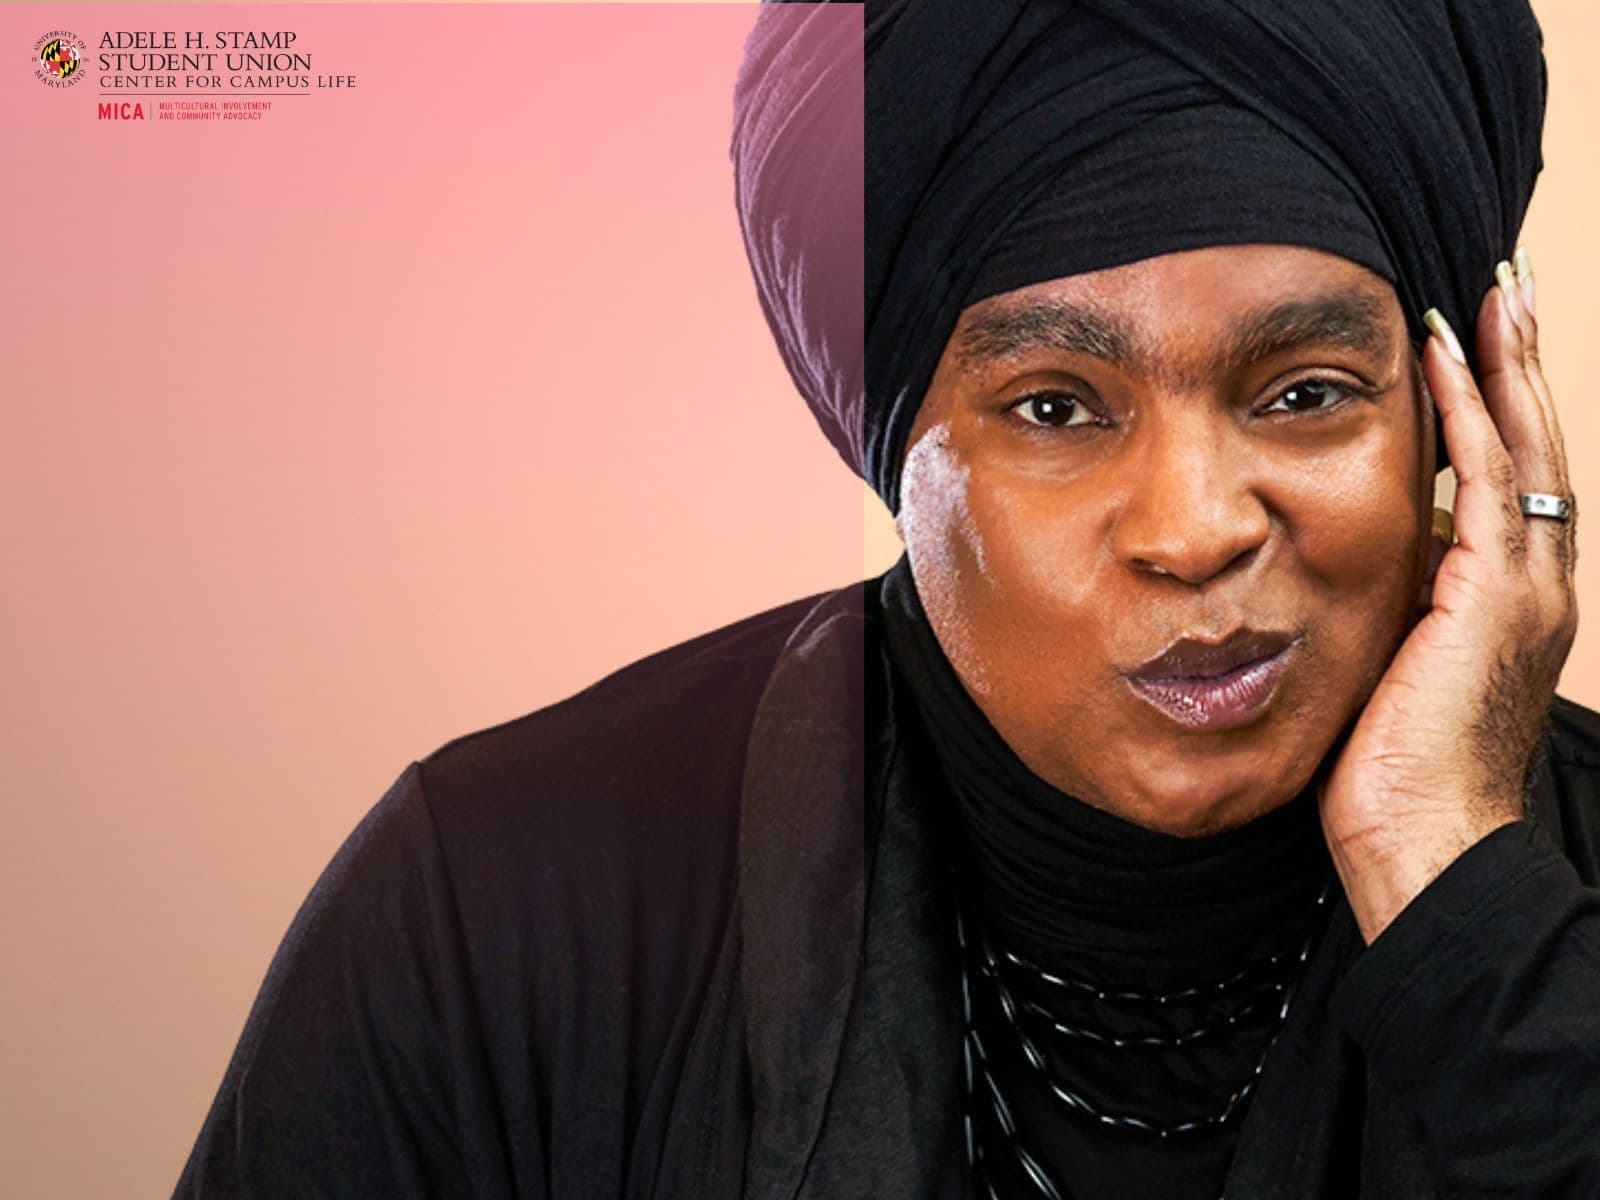 headshot of dark-skinned figure smizing at the camera, wearing a black outfit and a black turban, posing with their left hand against their face showing manicured nails and a silver ring. The text reads "Tuesday, April 4. Dinner at 7:30; Program at 8. Stamp Grand Ballroom. stamp.und.edu/pride. Announcing our Pride Month 2023 Keynote Speaker Rayceen Pendarvis."